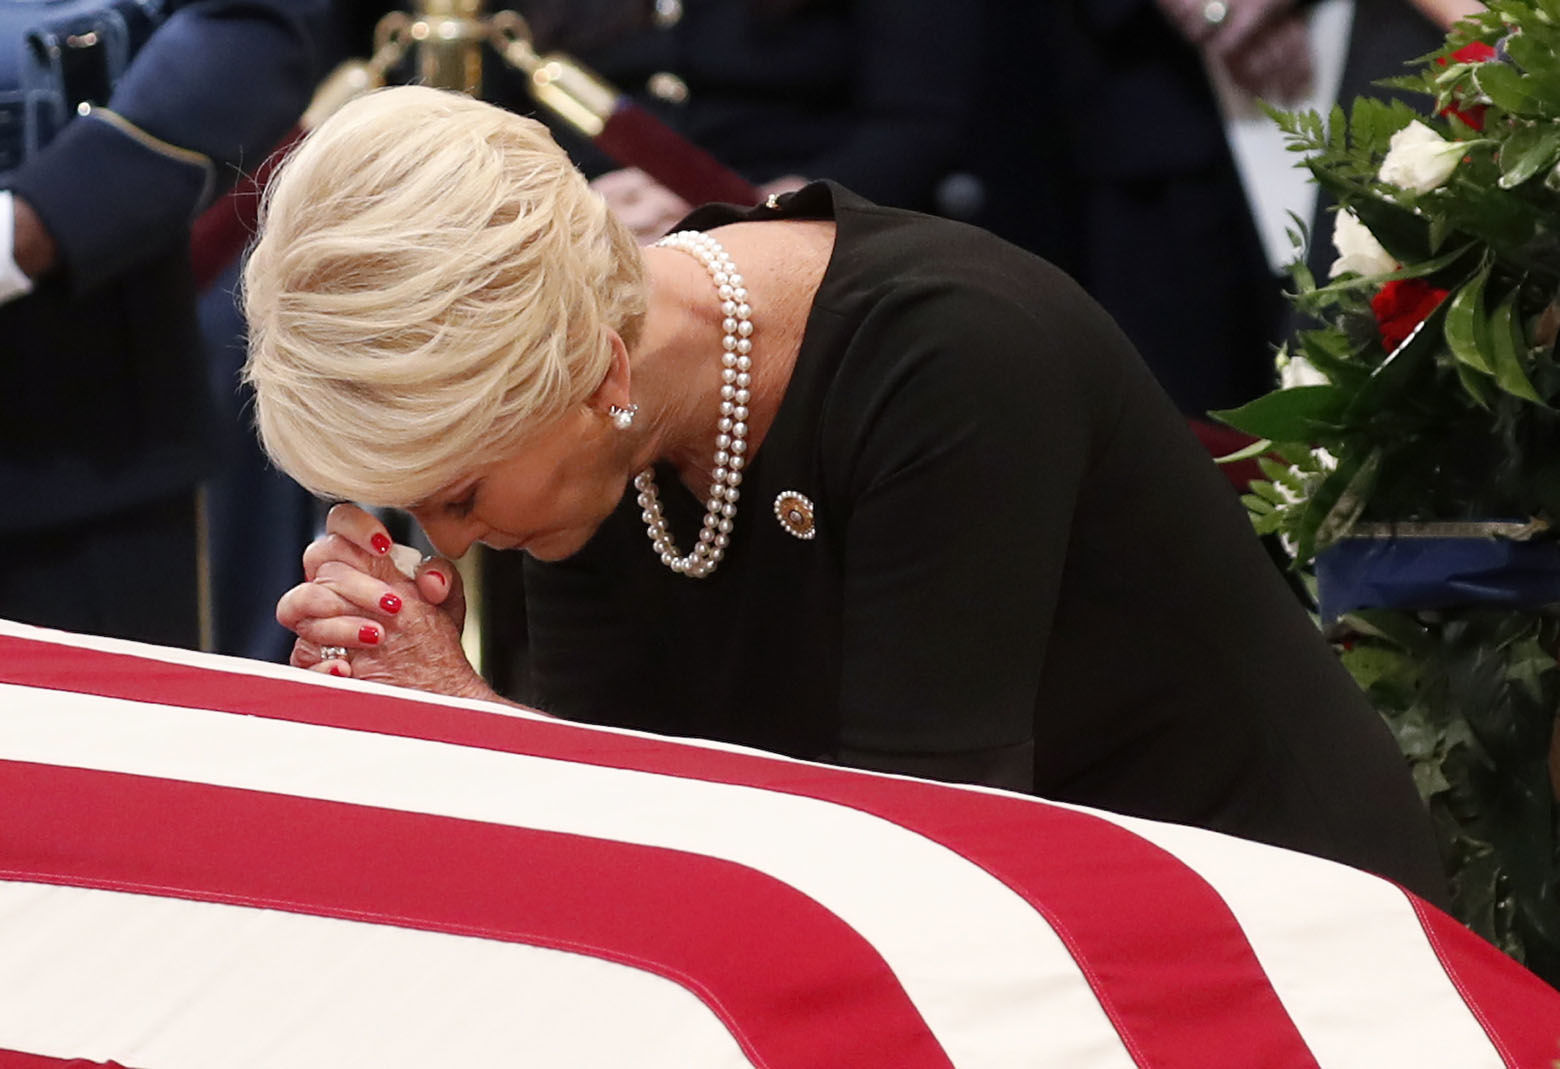 Cindy McCain pauses at the casket of her husband Sen. John McCain, R-Ariz., during a ceremony as McCain lies in state at the Rotunda of the U.S. Capitol in Washington, Friday, Aug. 31, 2018. (Kevin Lamarque/Pool Photo via AP)